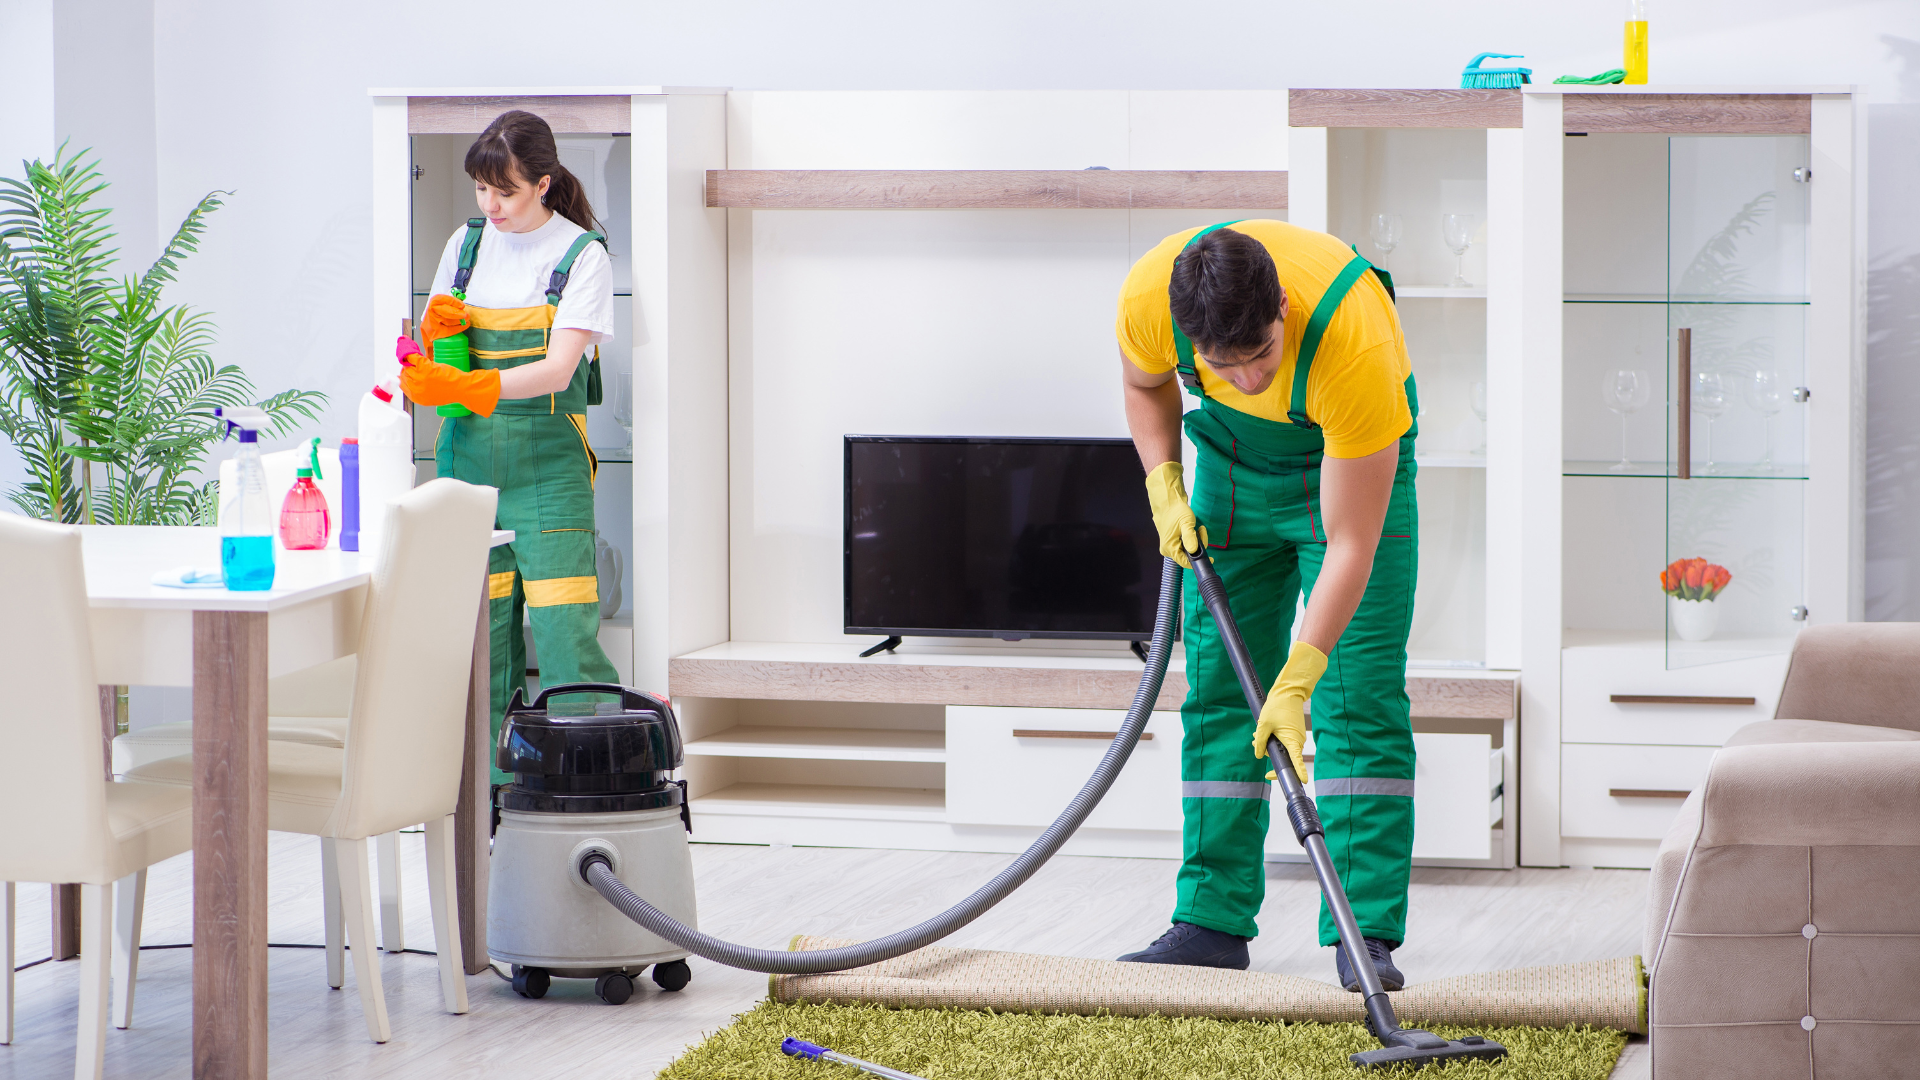 Factors to Consider When Choosing a Carpet Cleaning Company